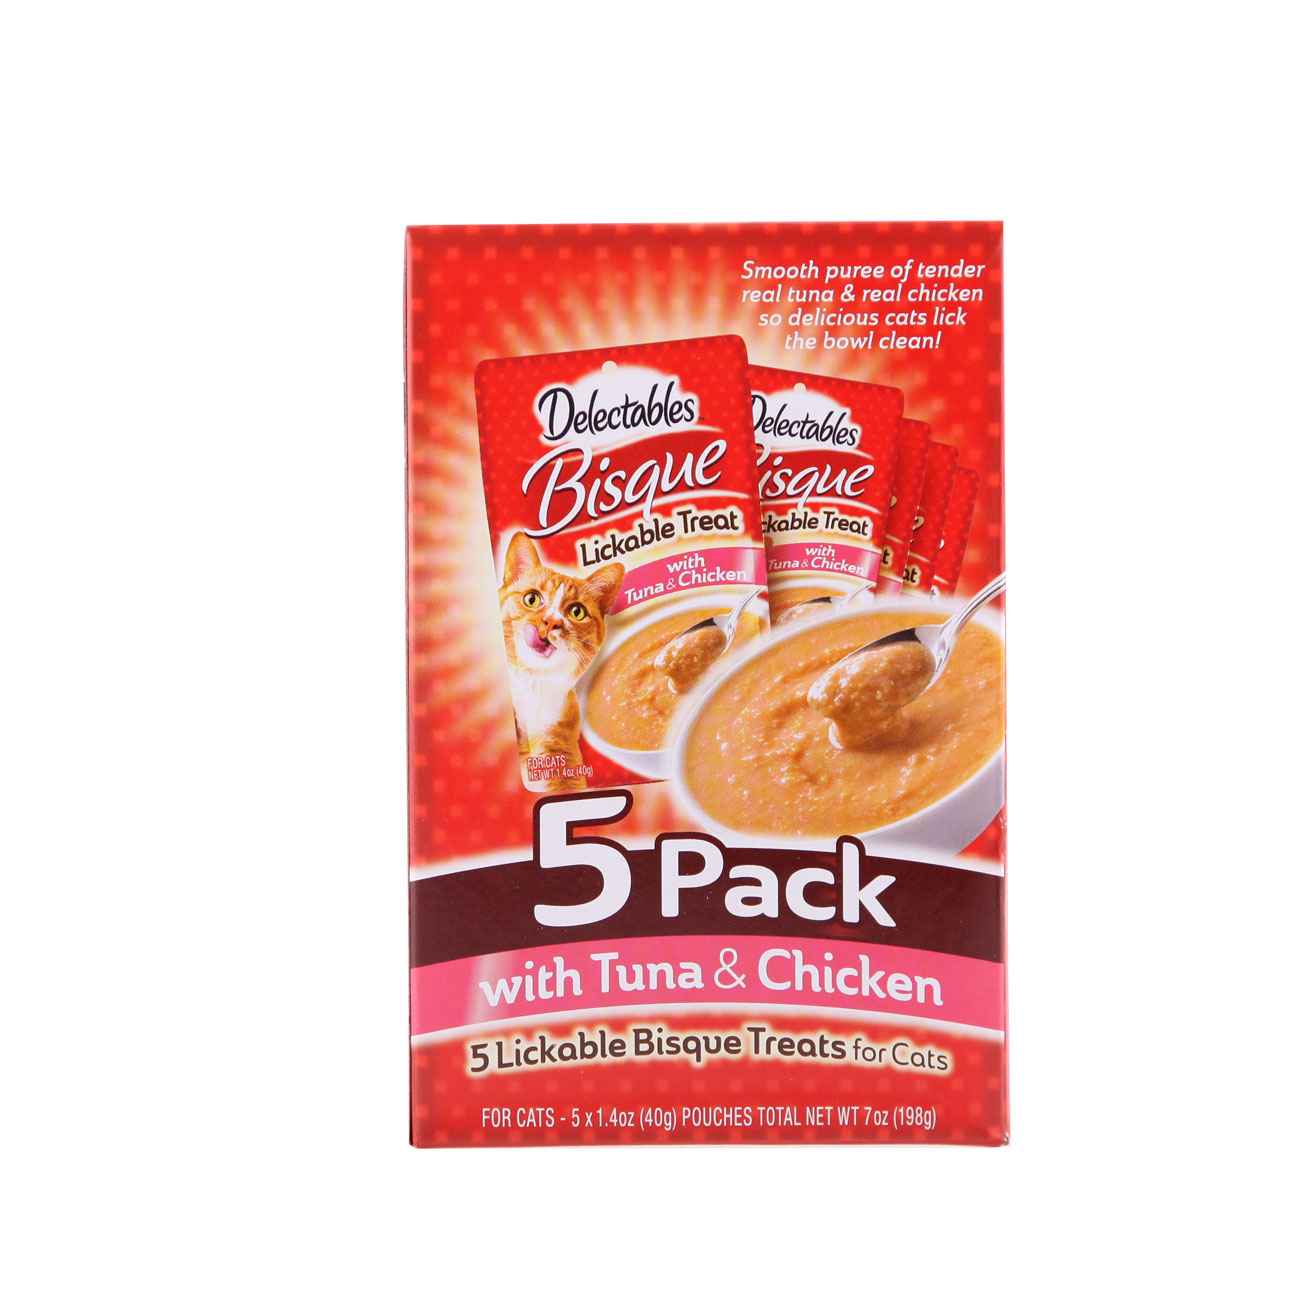 Delectables Bisque. 5 pack of real tuna and chicken bisque for cats, Hartz SKU 3270015467